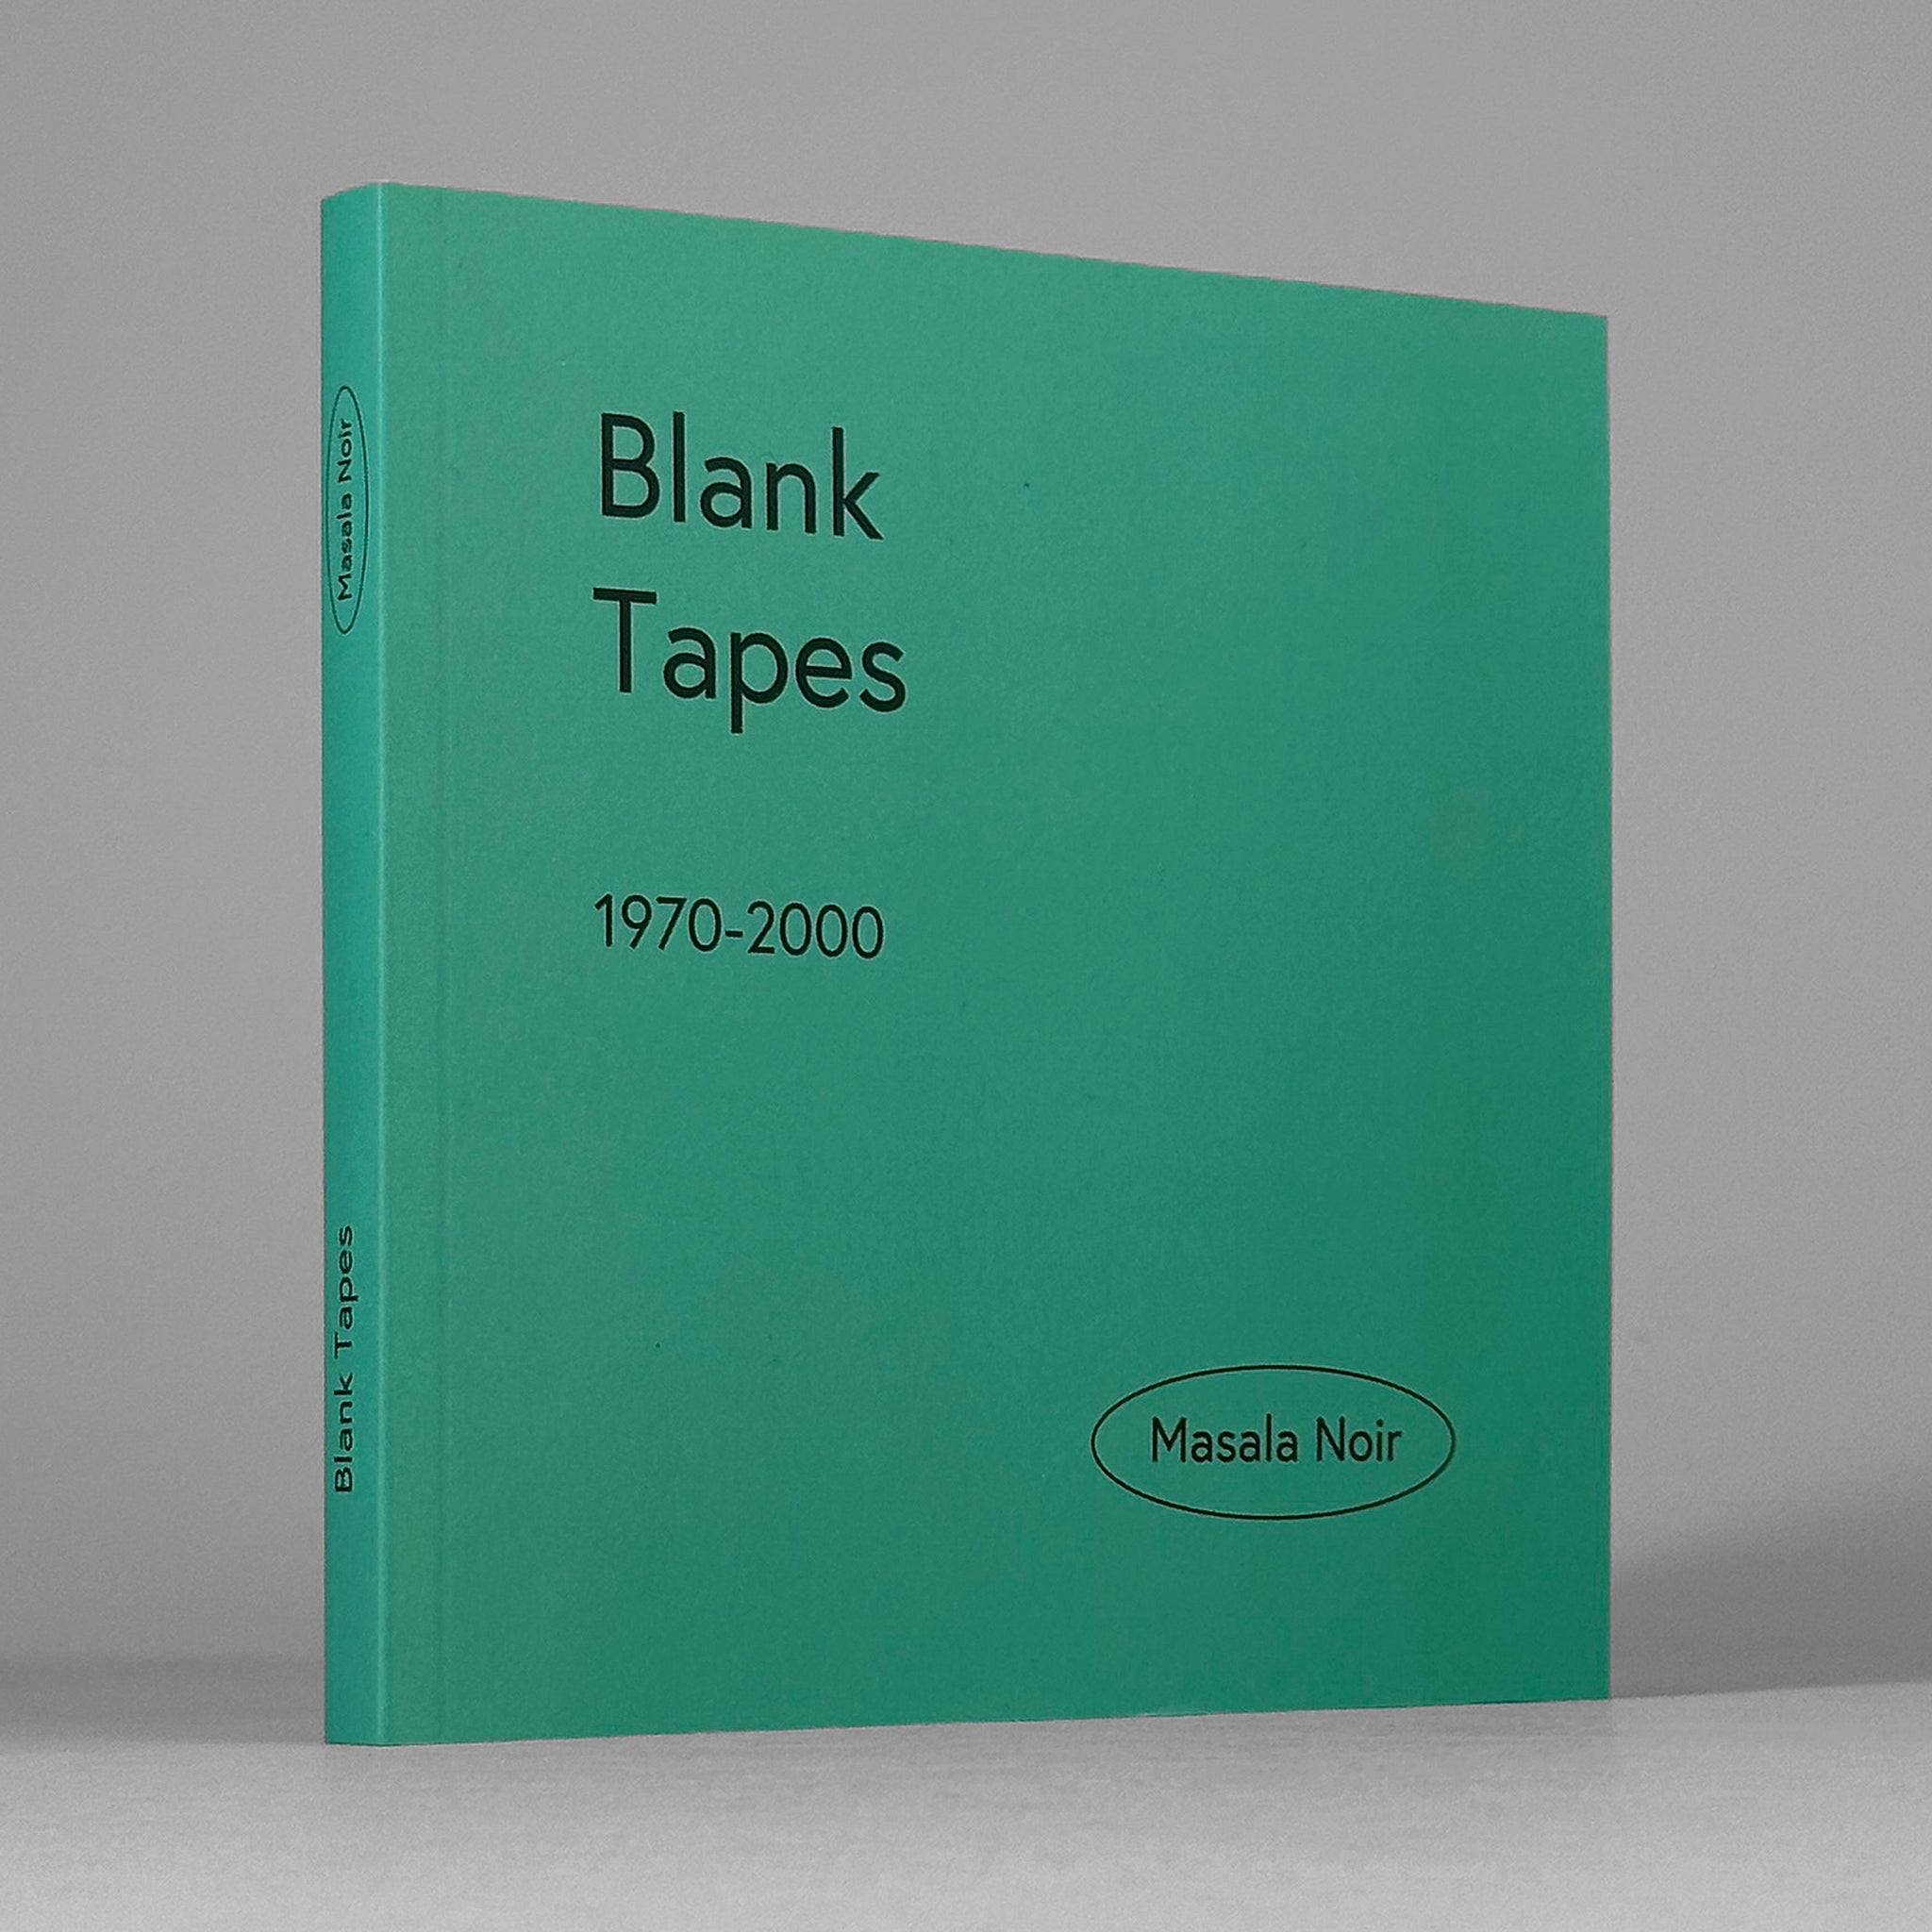 Blank Tapes, 1970-2000